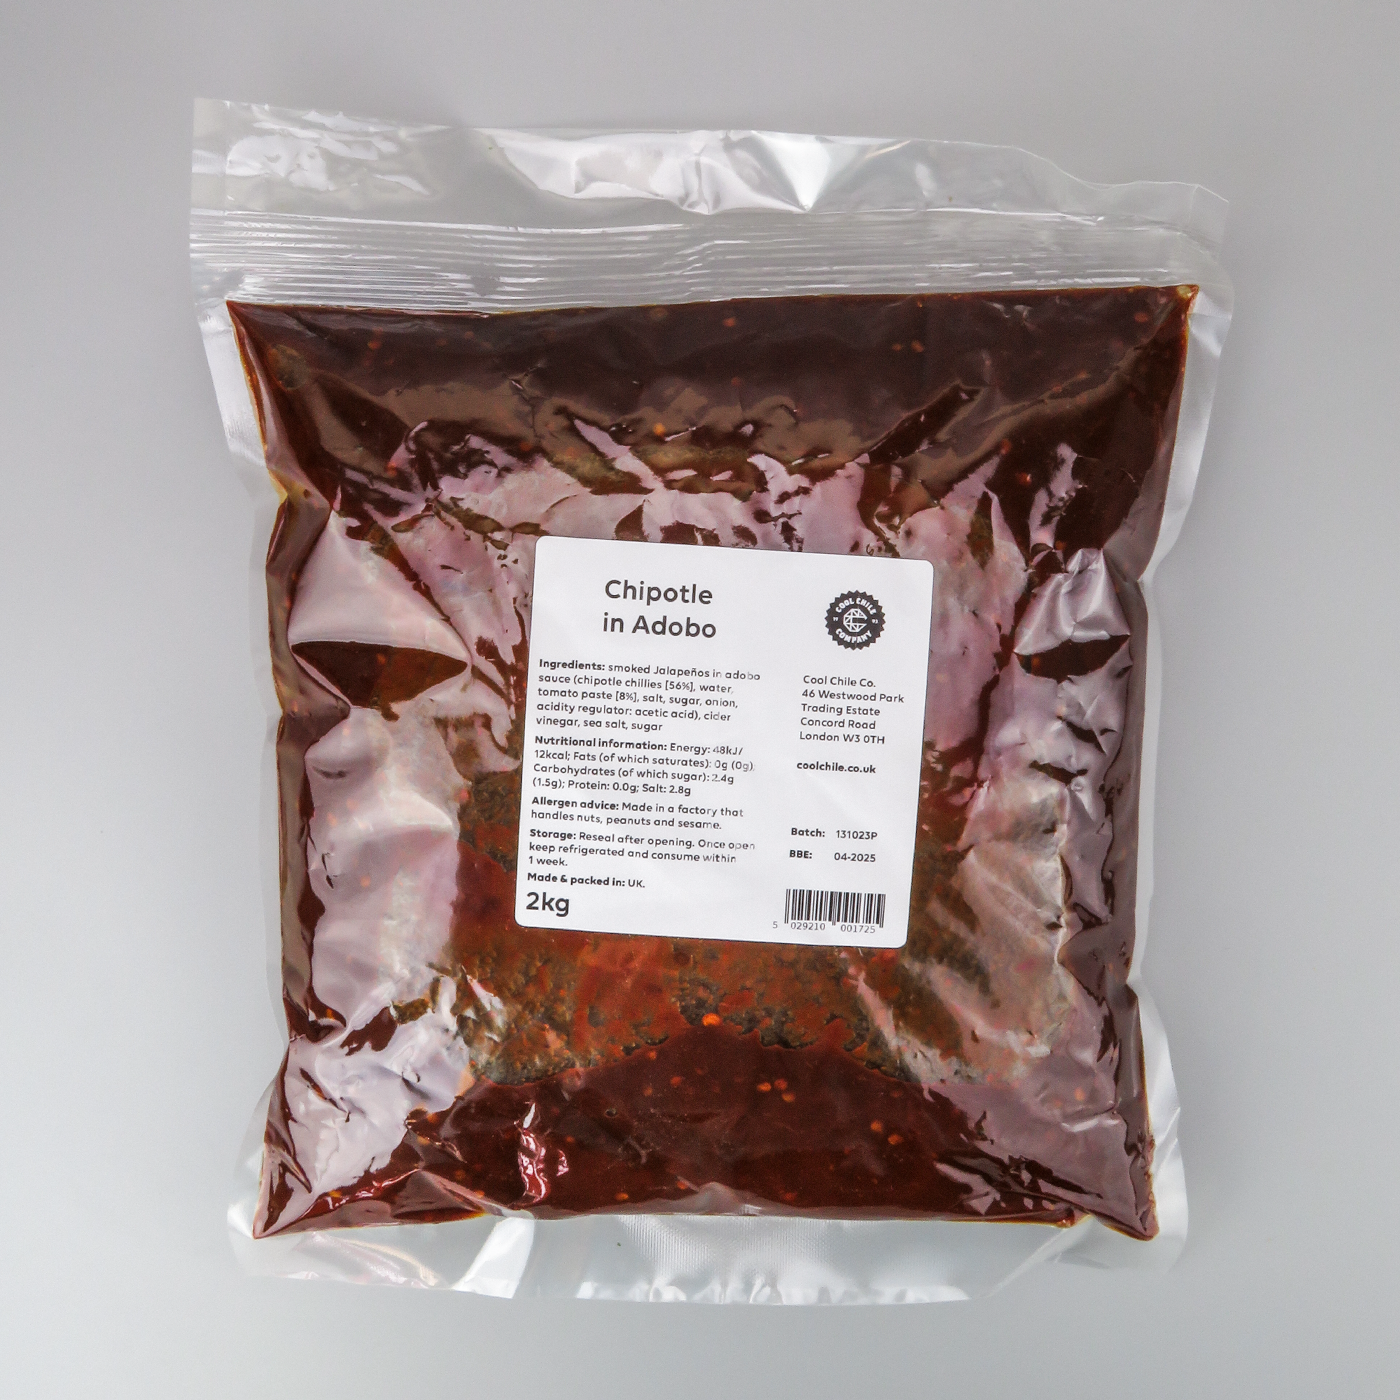 Chipotle in Adobo - product image